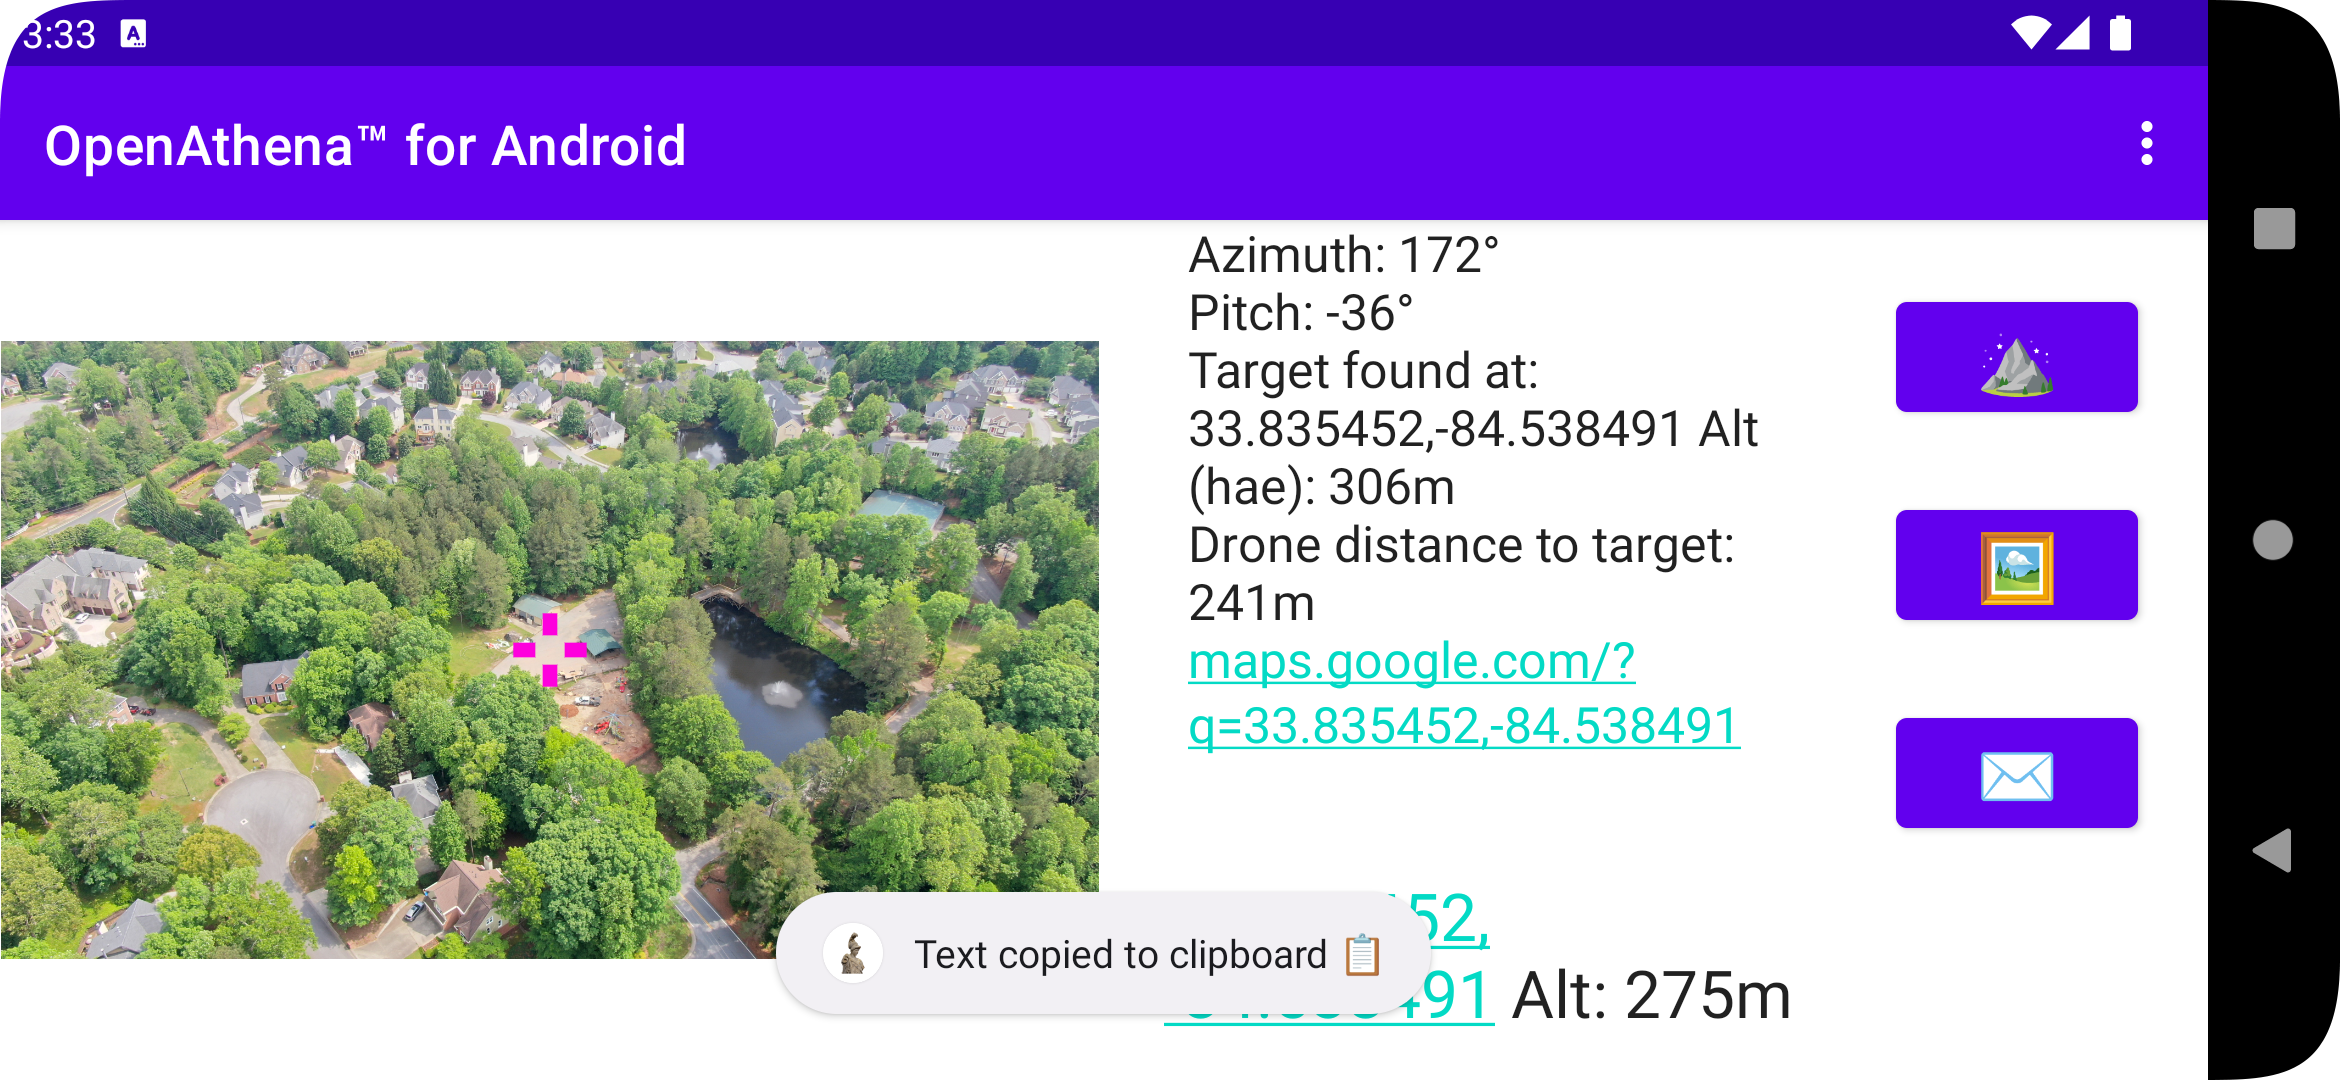 OpenAthena Android DJI_0419.JPG target location text copied to clipboard